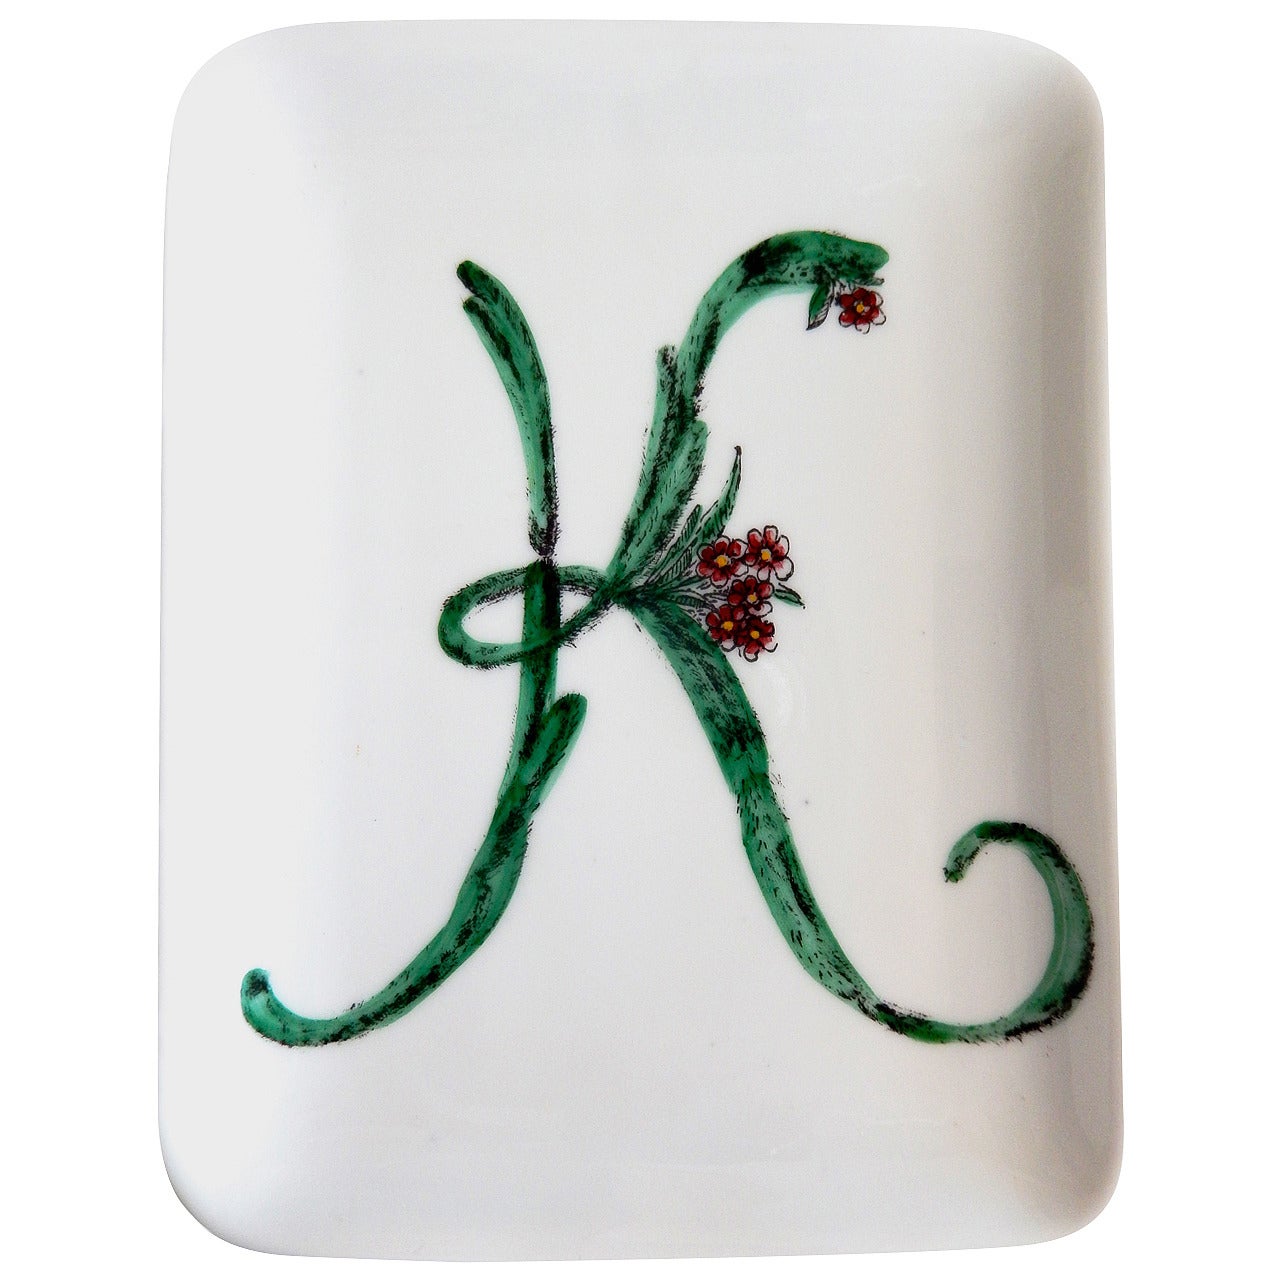 Scarce Fornasetti Dish with Letter "K"